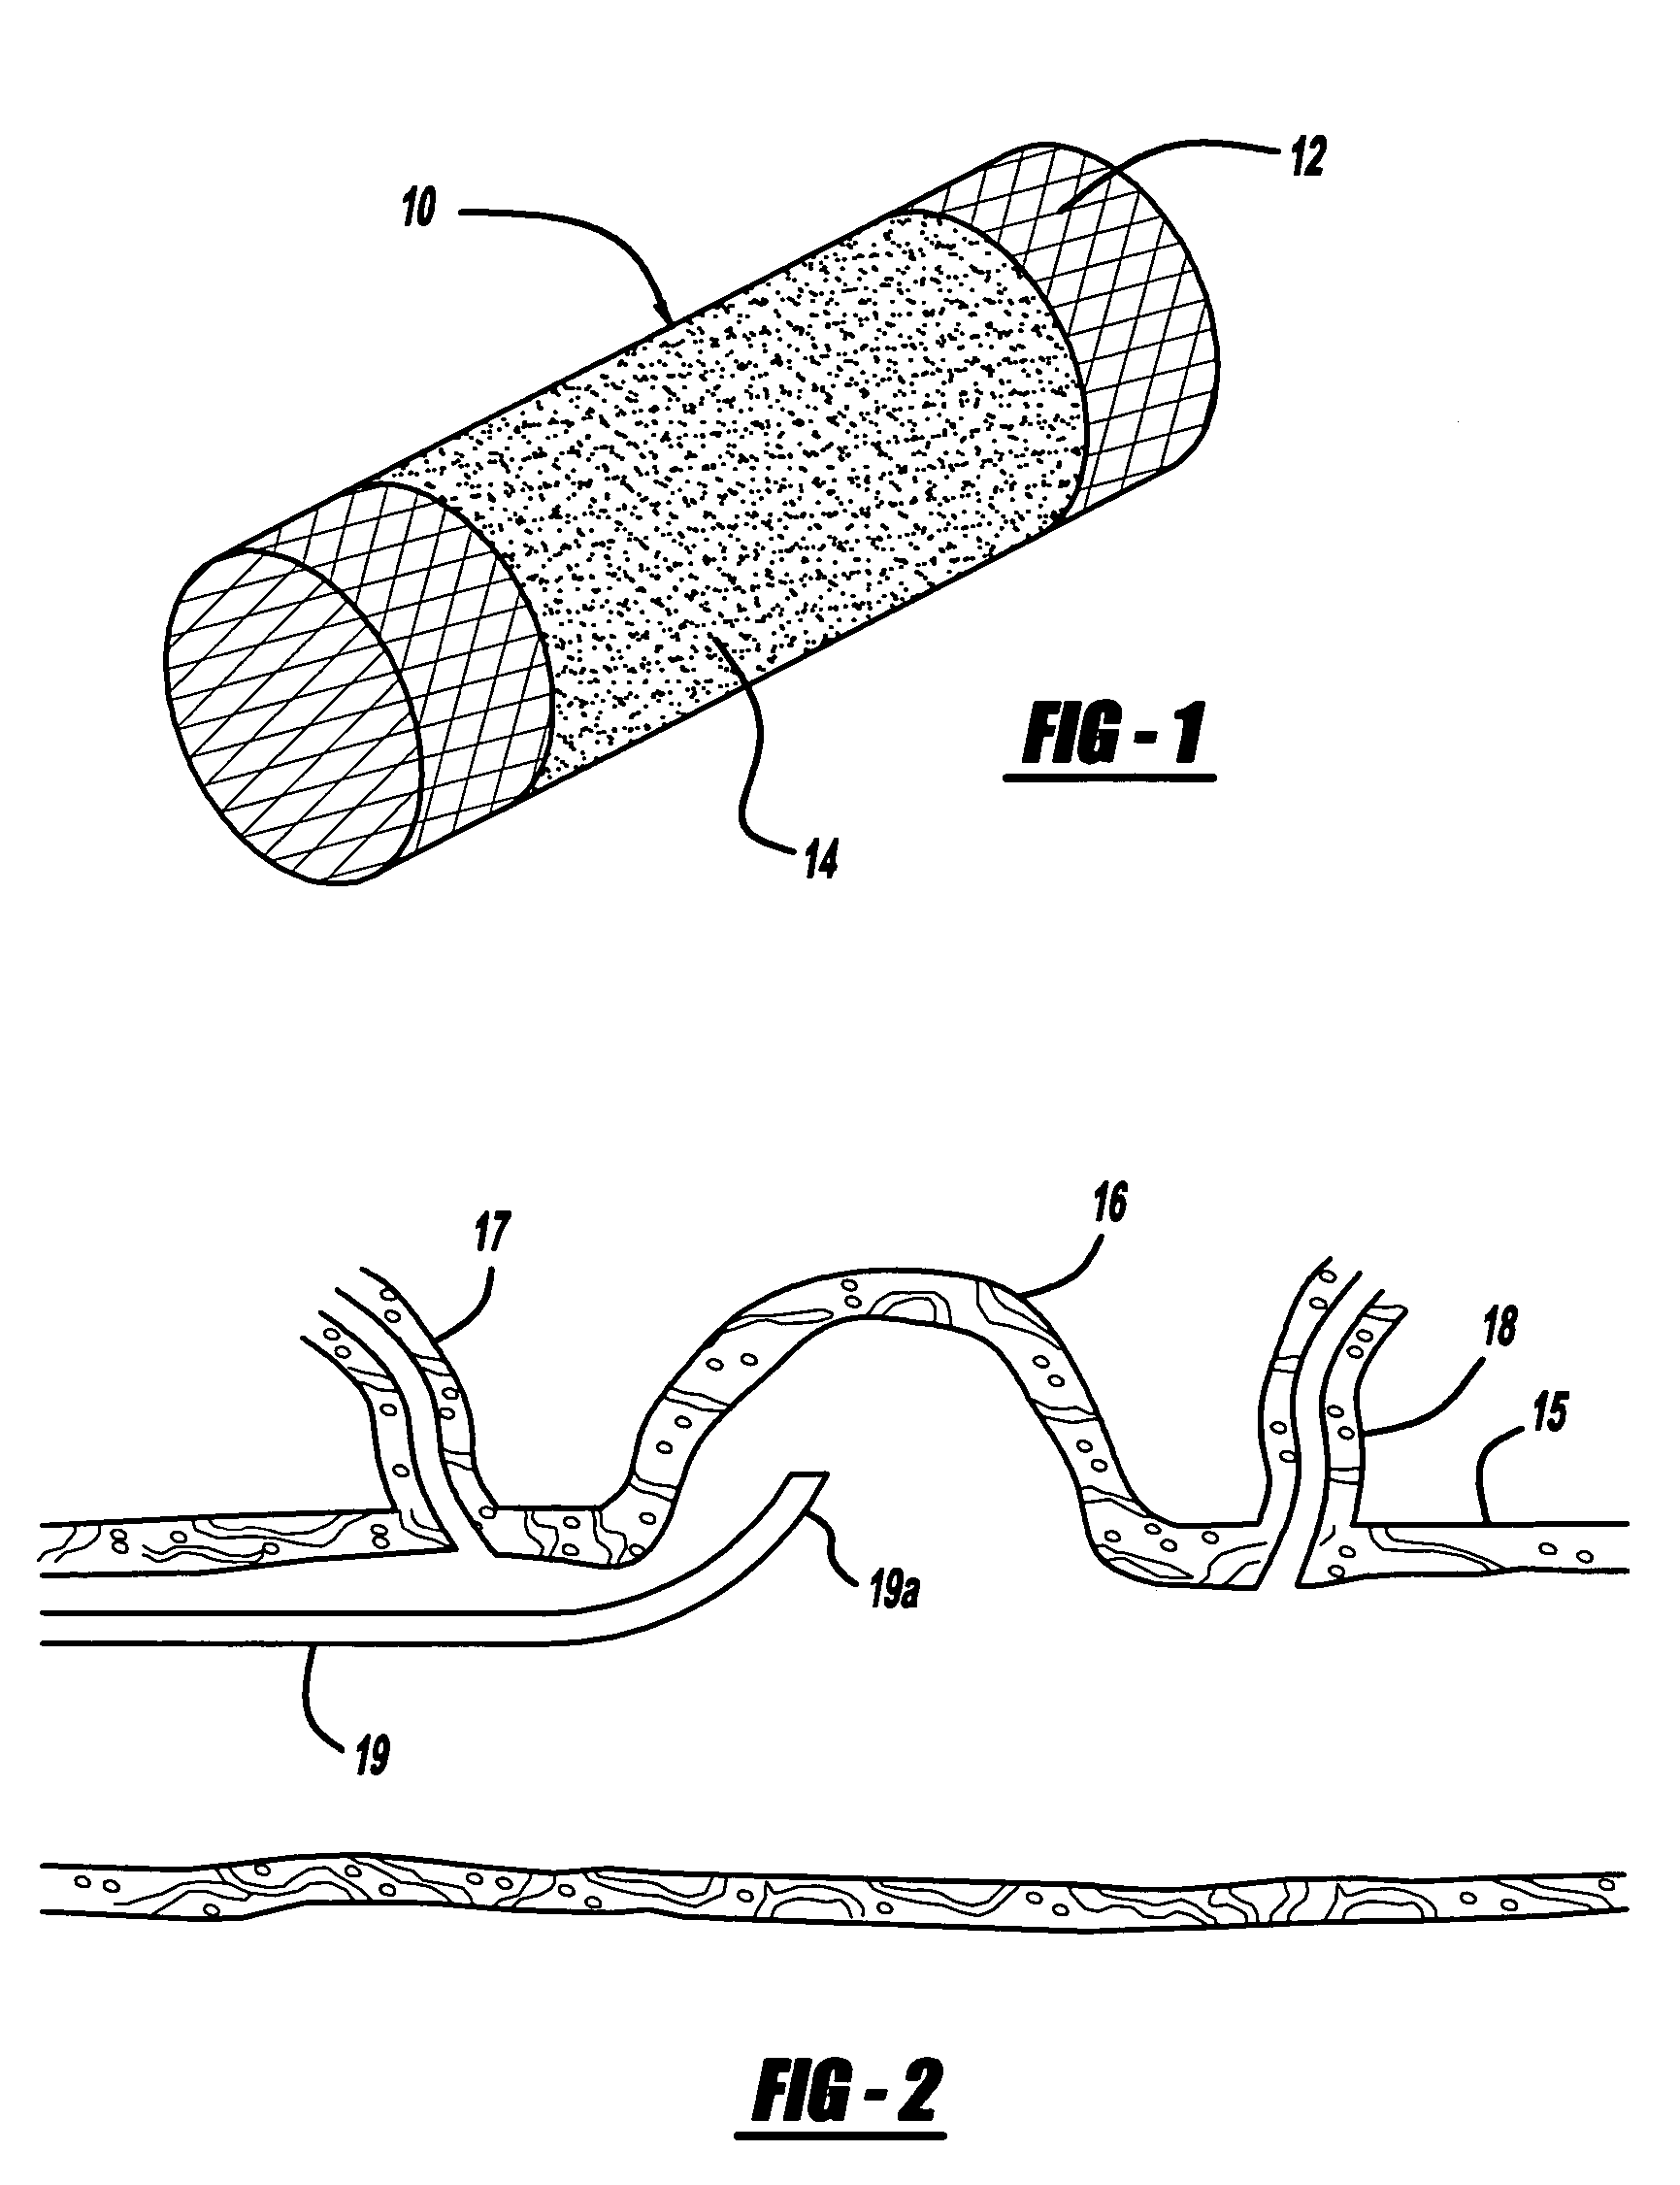 Expandable stent having a stabilized portion